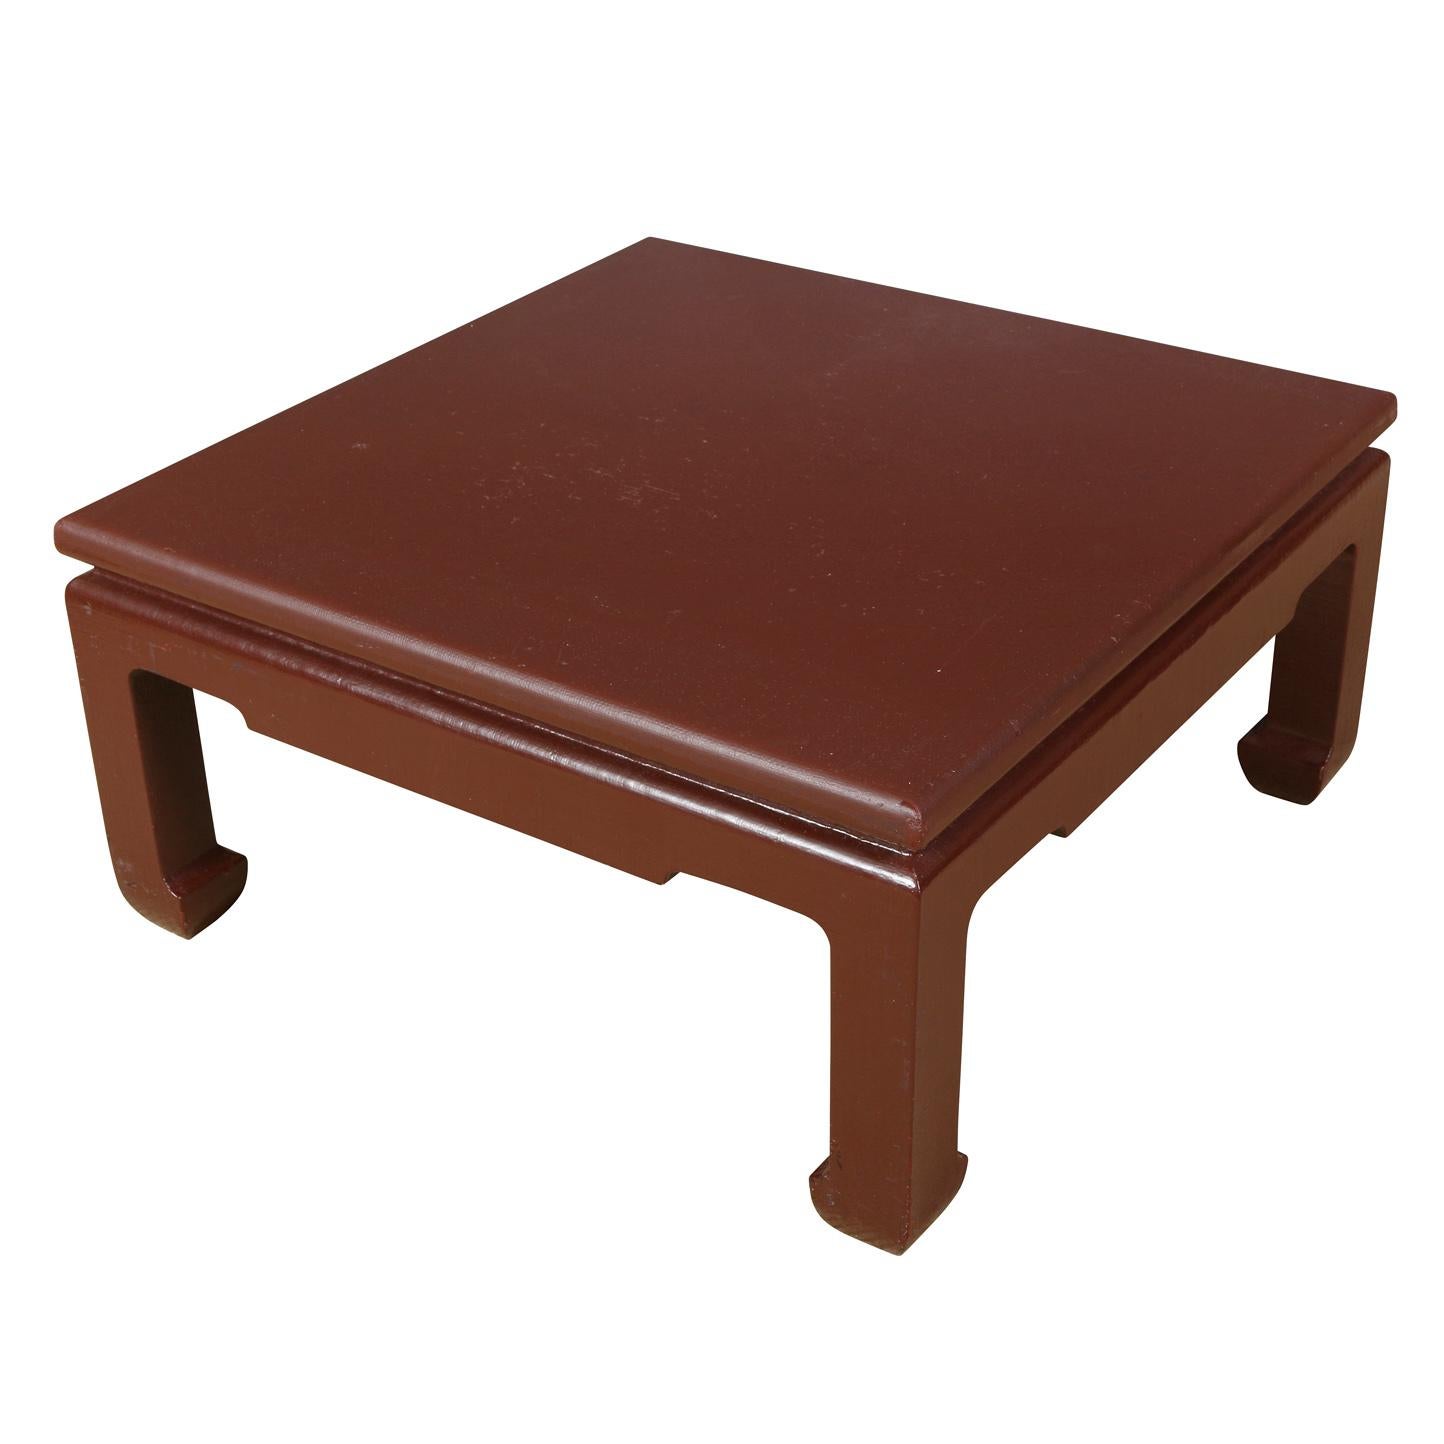 A Karl Springer style oxblood lacquered grasscloth cocktail table with Asian style feet.